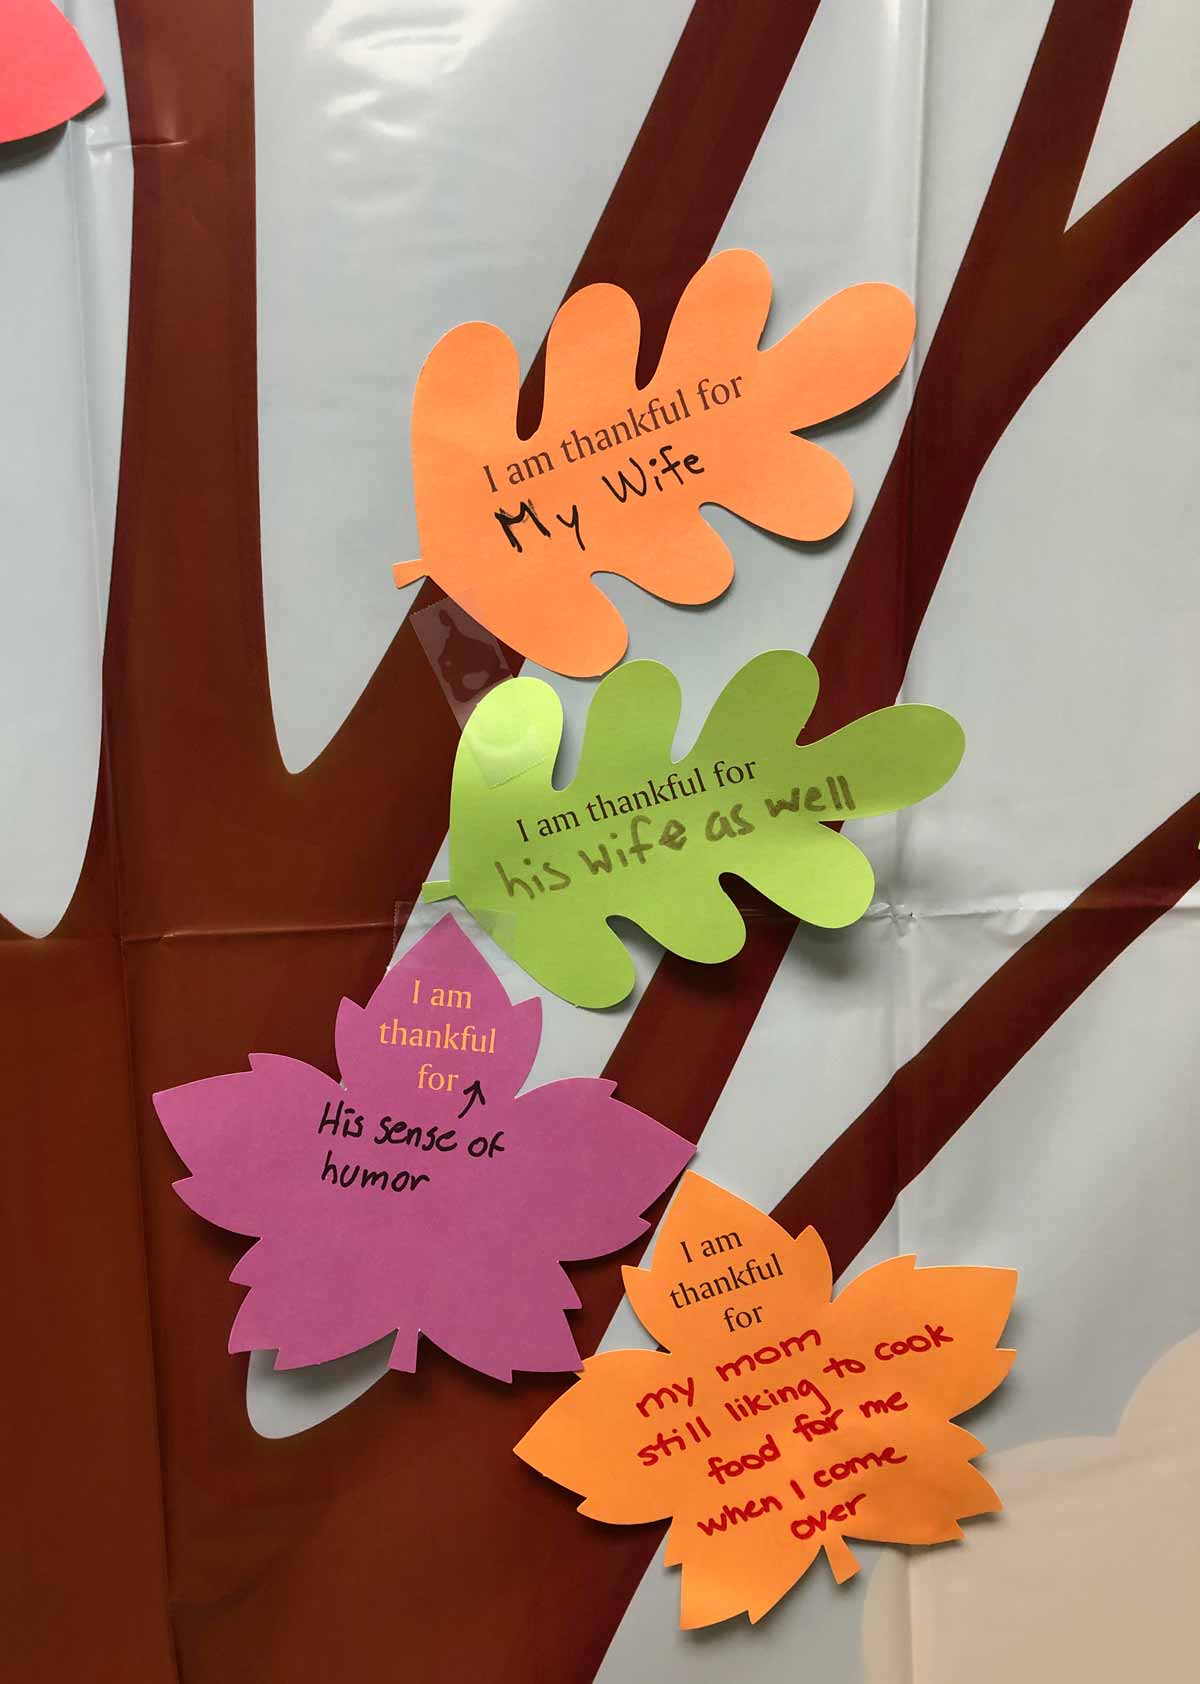 The Thankful Tree at work